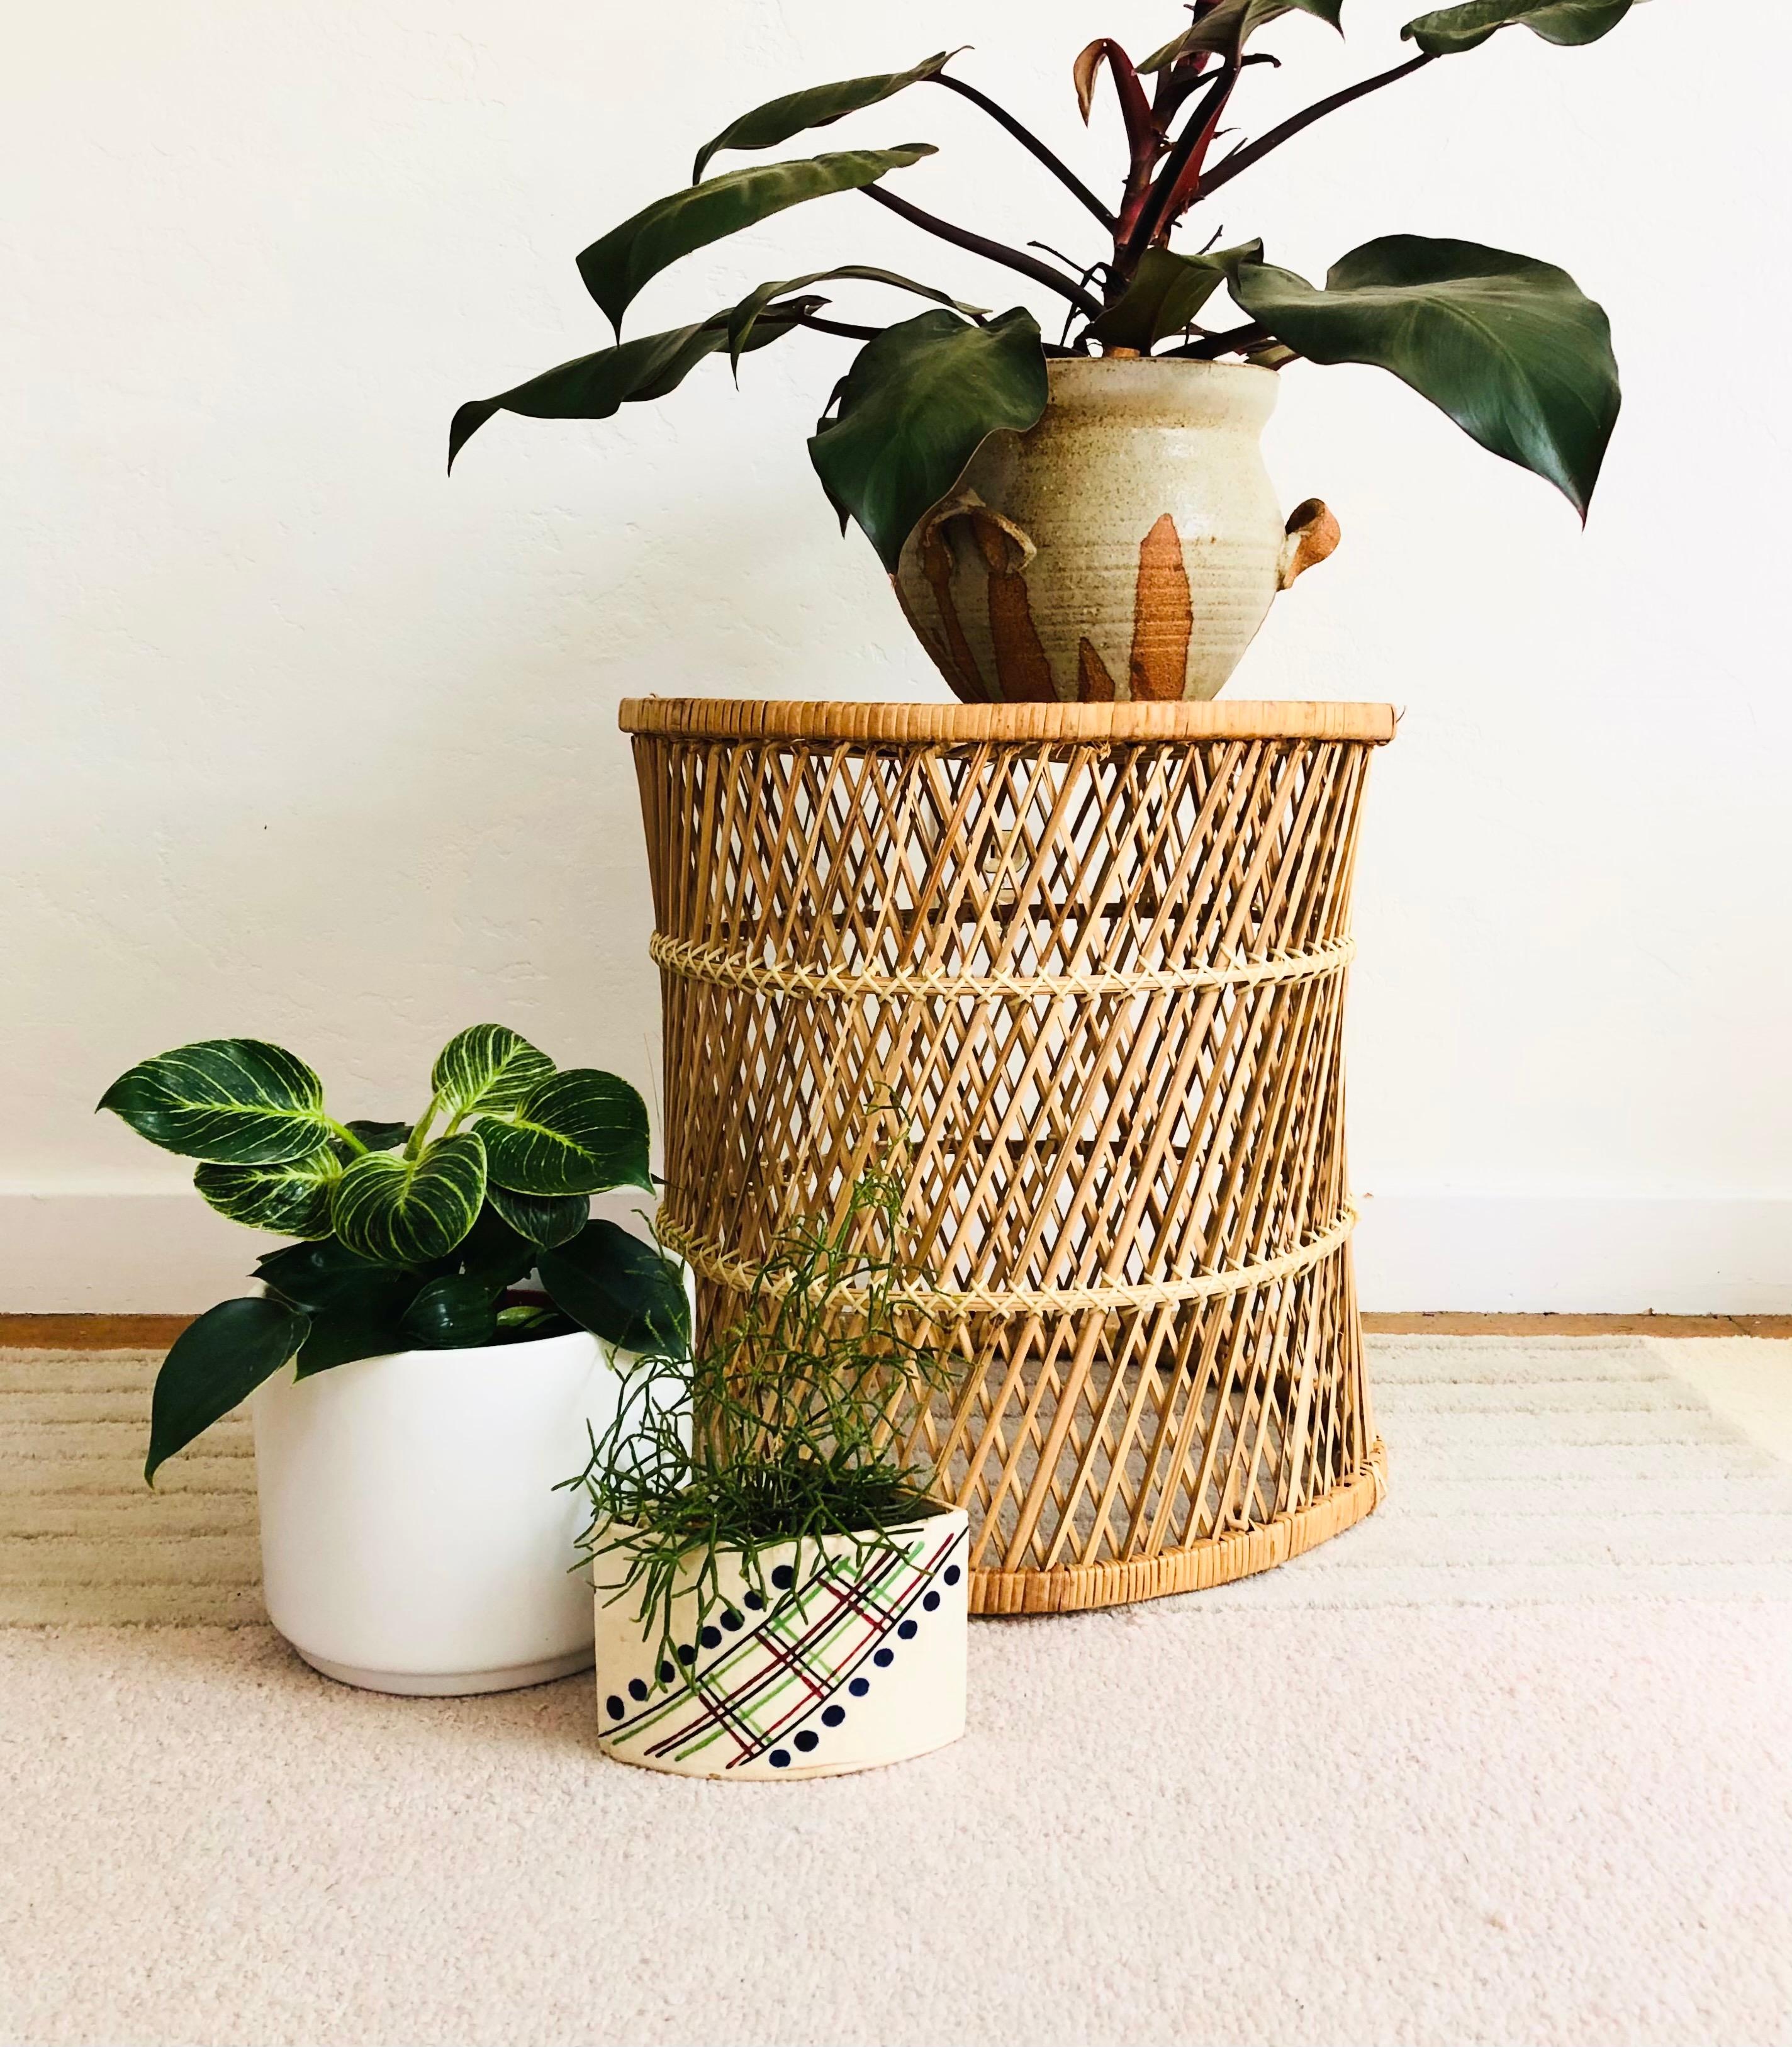 A vintage basket stool. Nice cylinder drum shape. Made of warm natural light brown pieces of wicker, woven into a diamond pattern on the sides and circular pattern on top. A versatile piece to use as a side table, plant stand, or as a storage basket